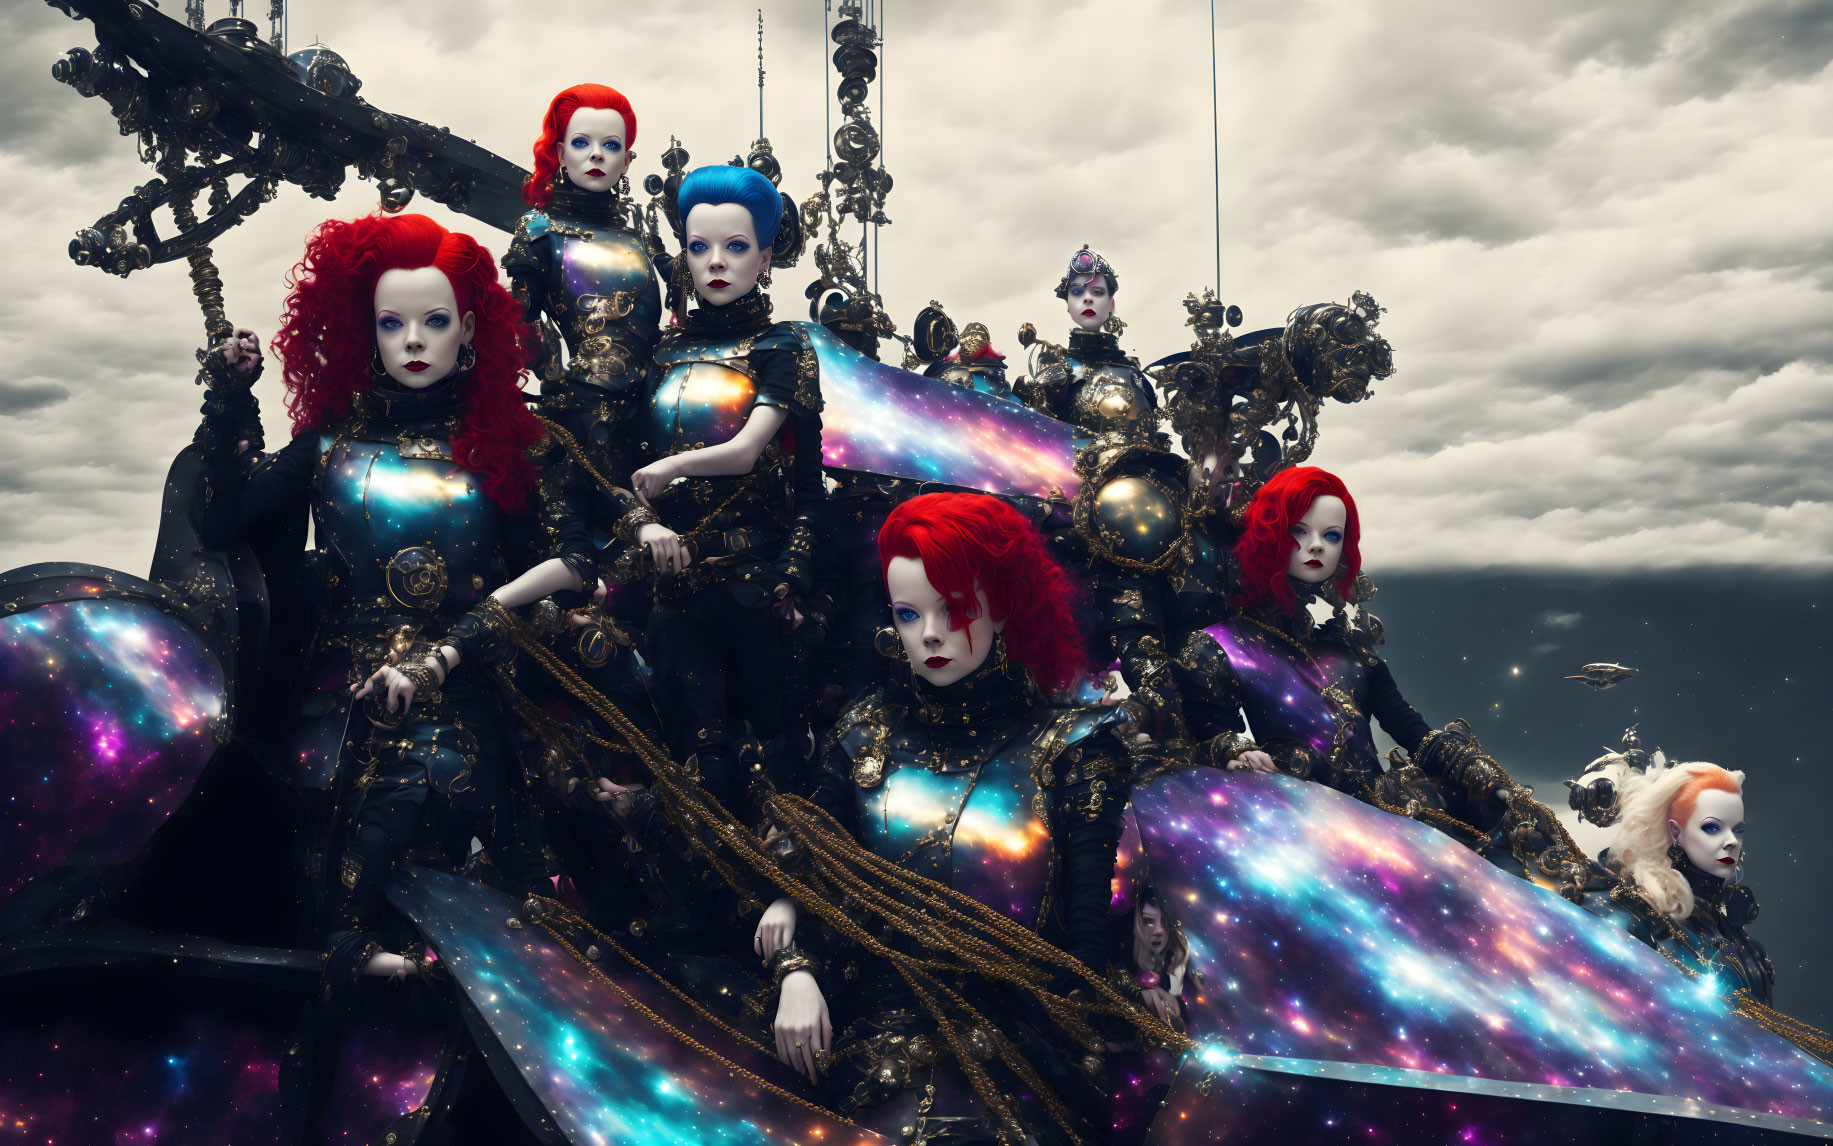 Elaborately Dressed Dolls with Cosmic Outfits on Dark Throne